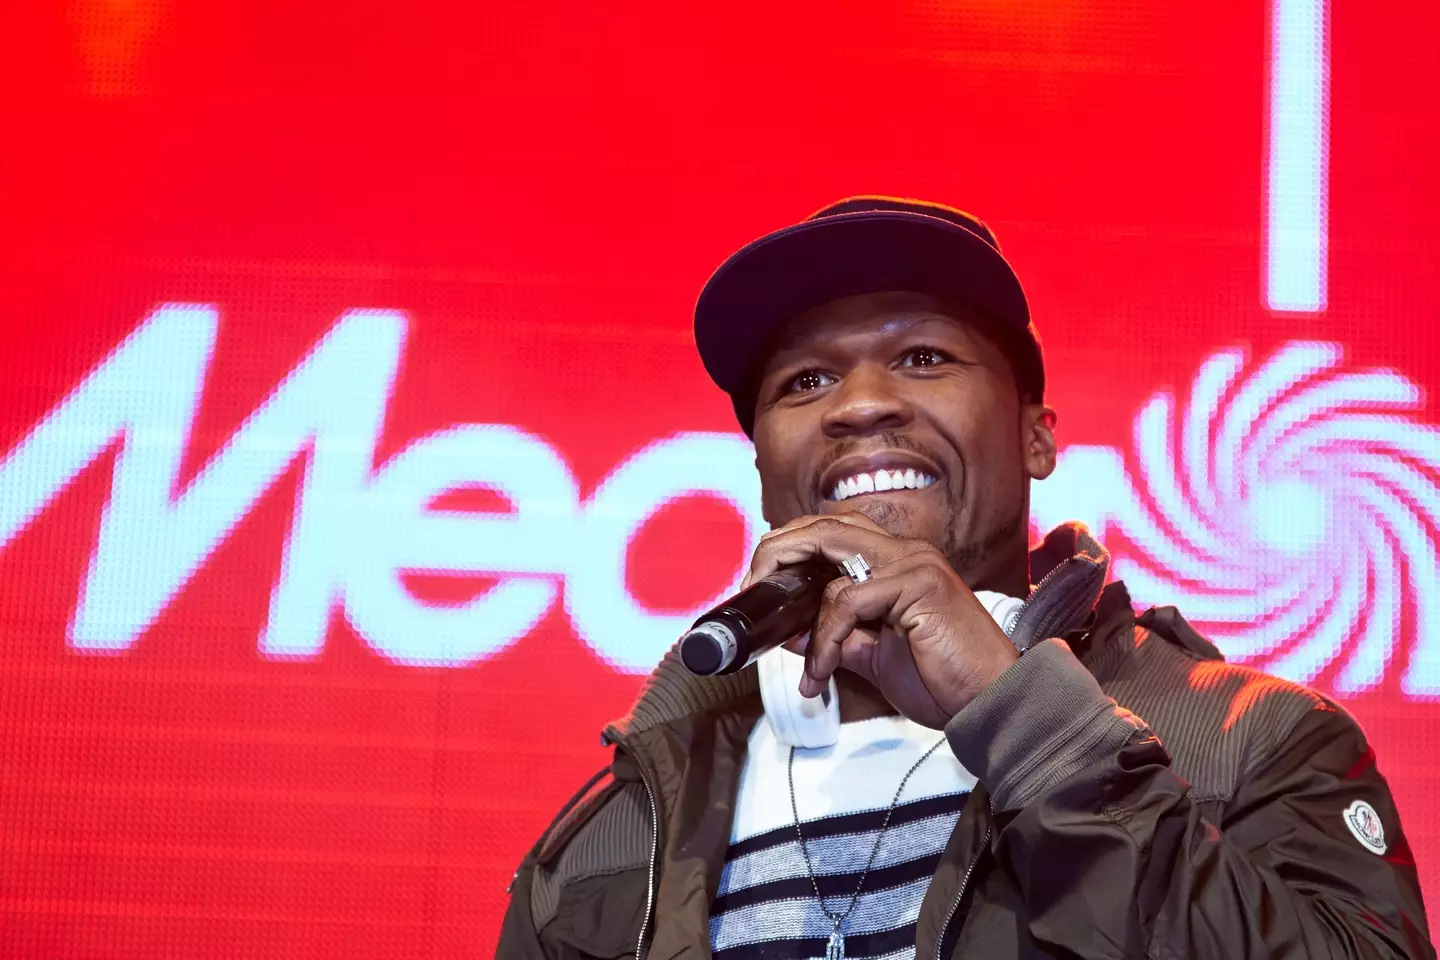 50 Cent blew plenty of money on legal fees, a lavish lifestyle and some investments which didn't quite pan out but he became debt free in 2017.